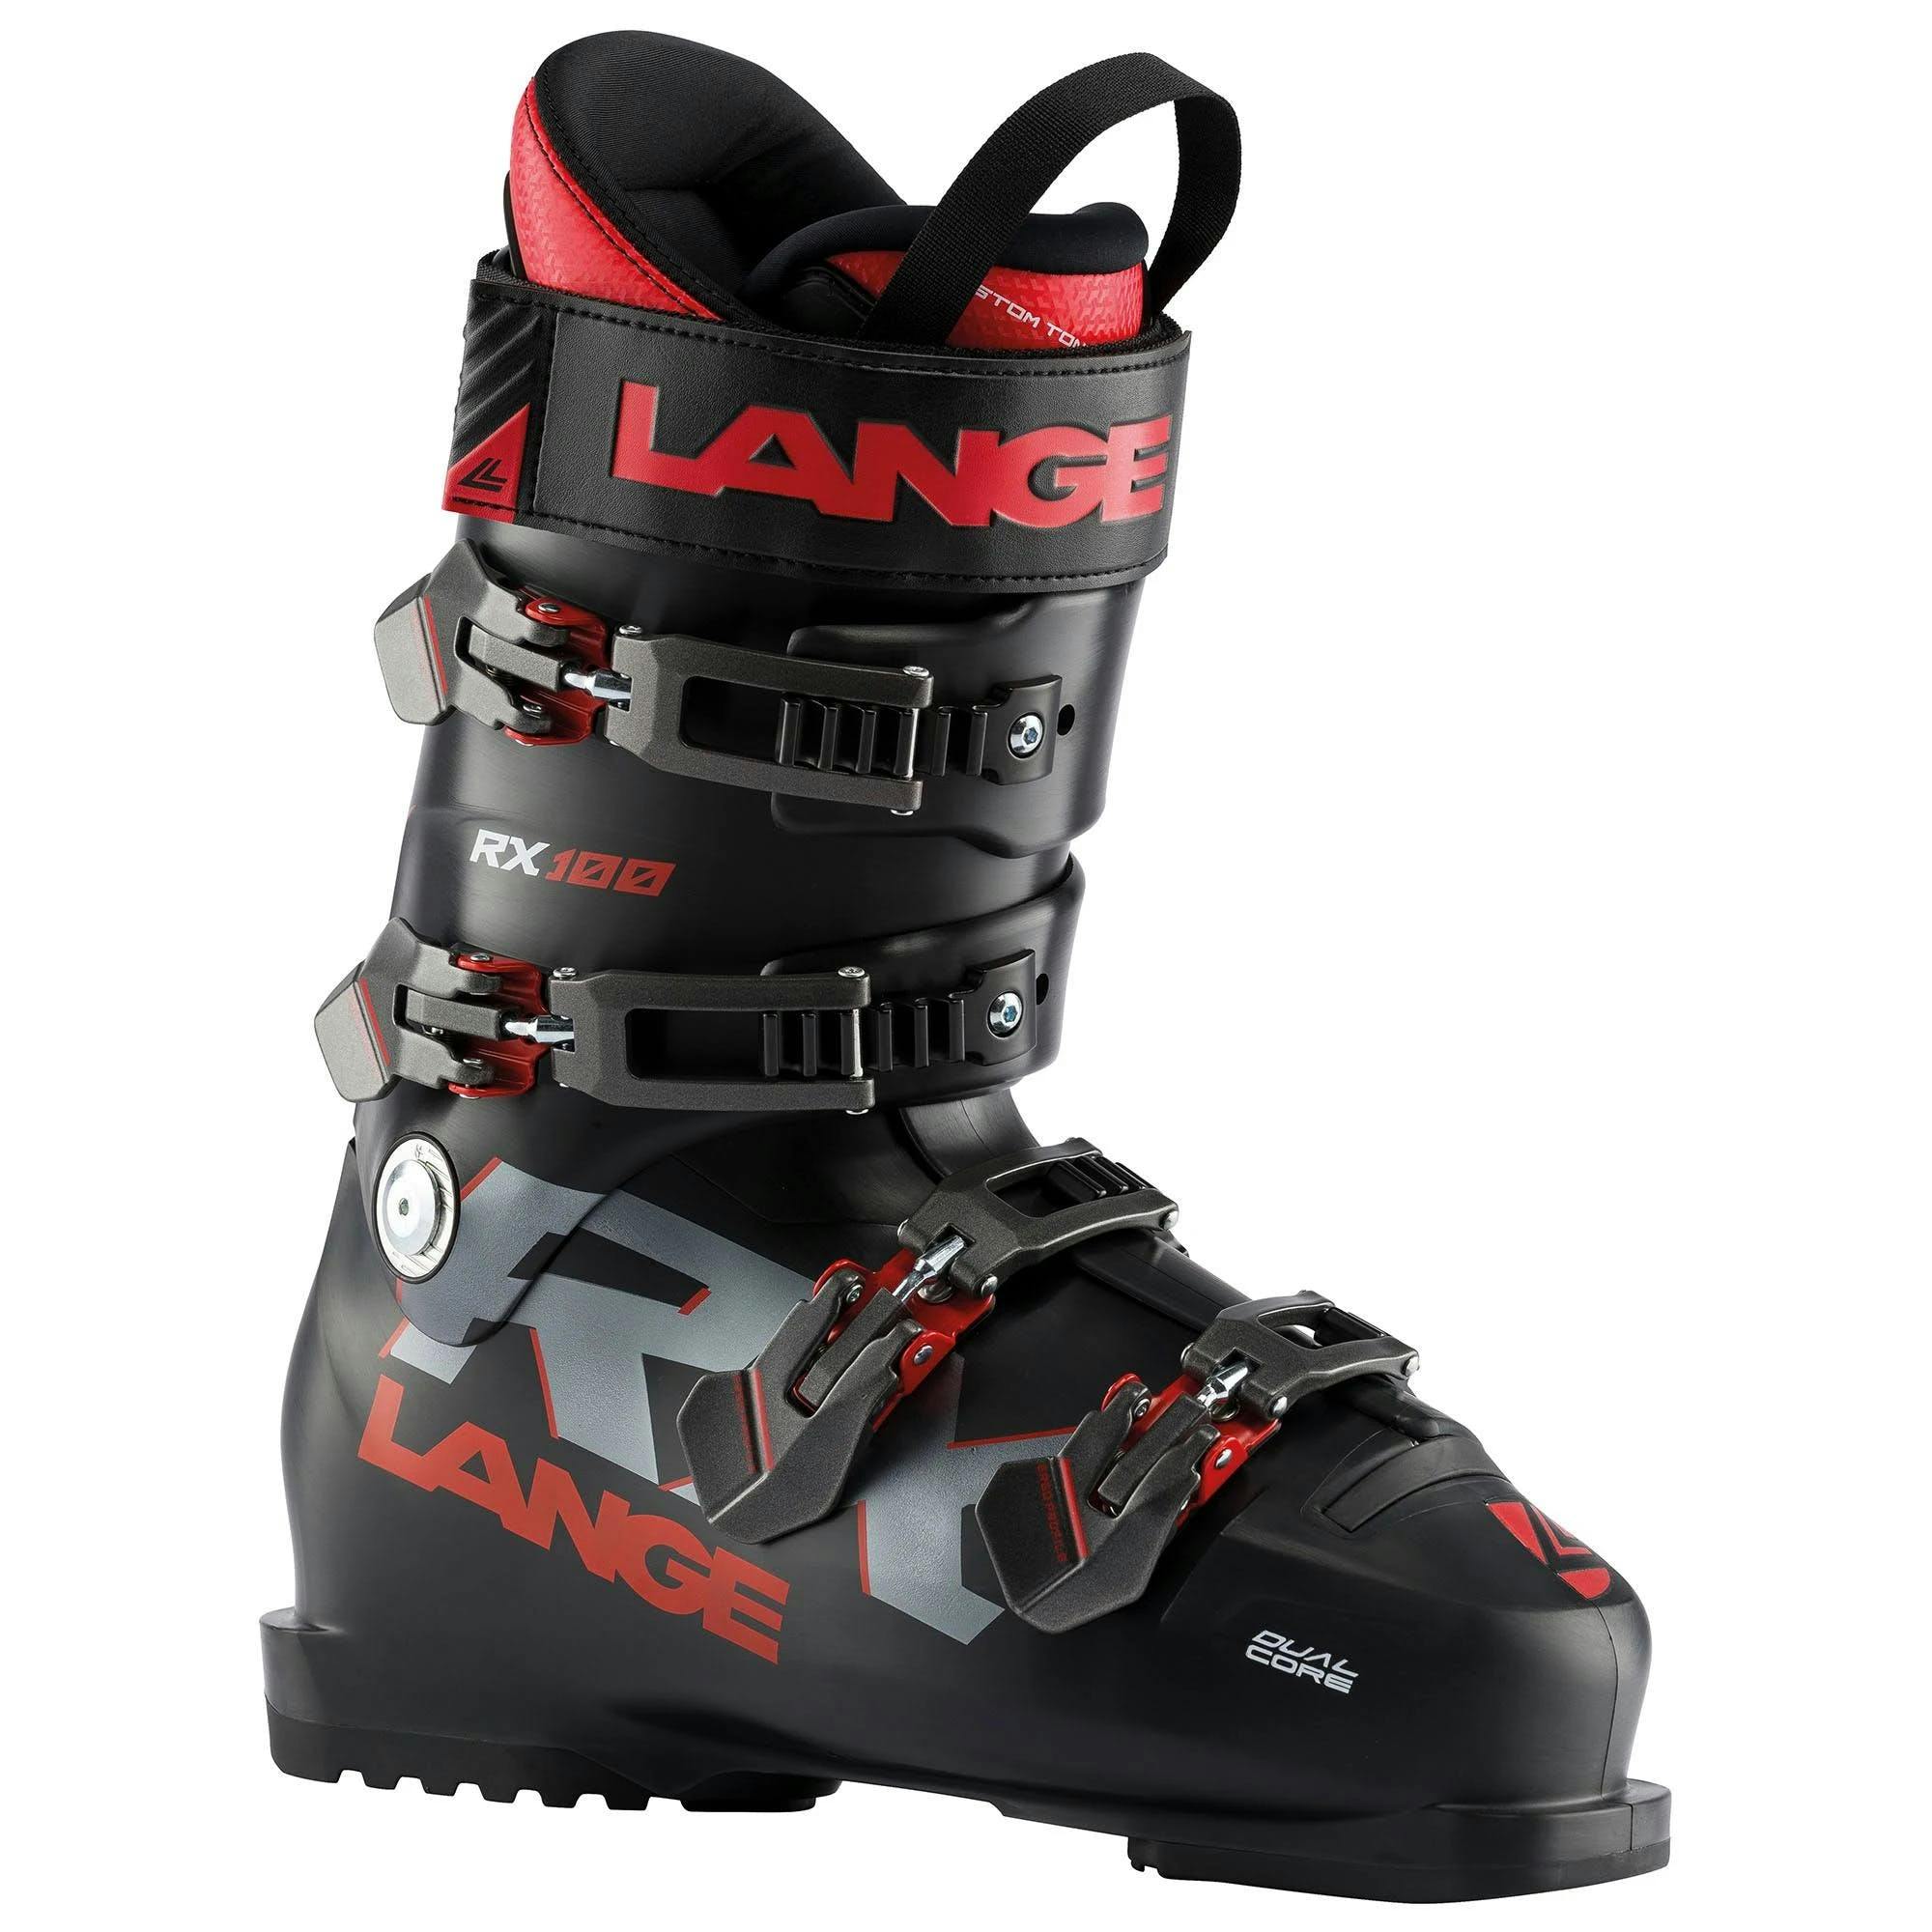 A black ski boot with red accents and two labels reading Lange